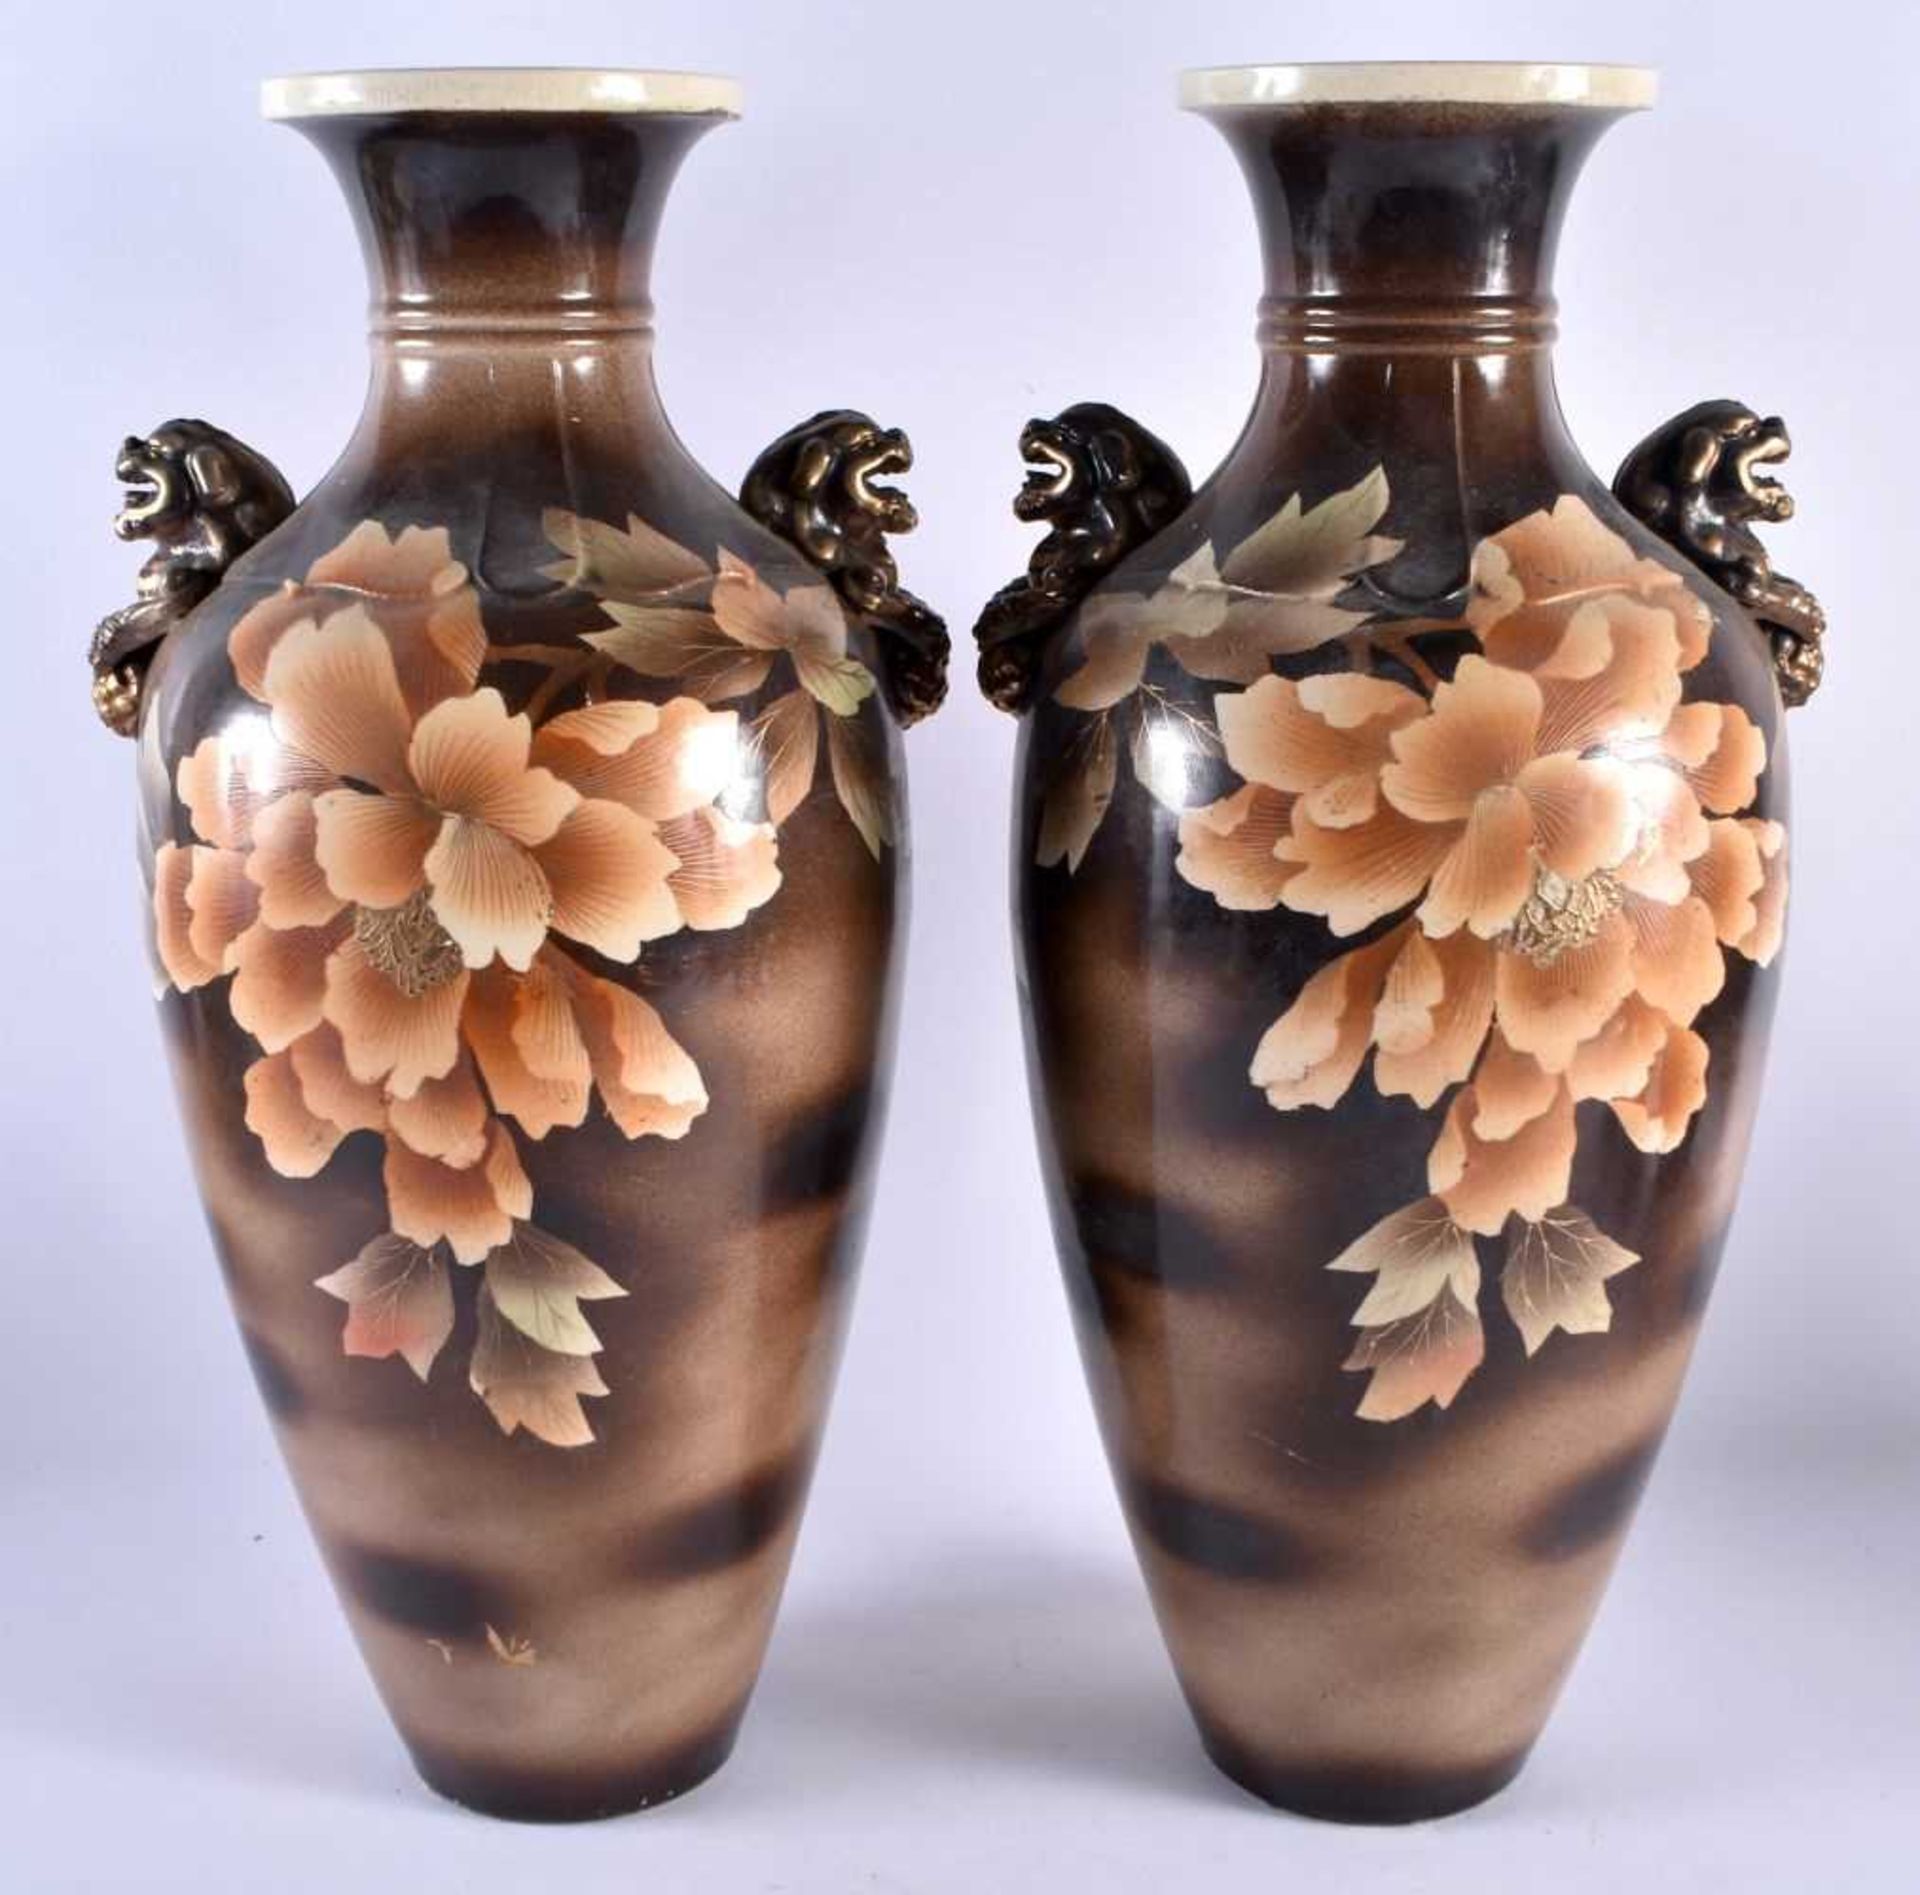 A LARGE PAIR OF LATE 19TH CENTURY JAPANESE MEIJI PERIOD SATSUMA VASES. 44 cm x 18 cm. - Image 5 of 23